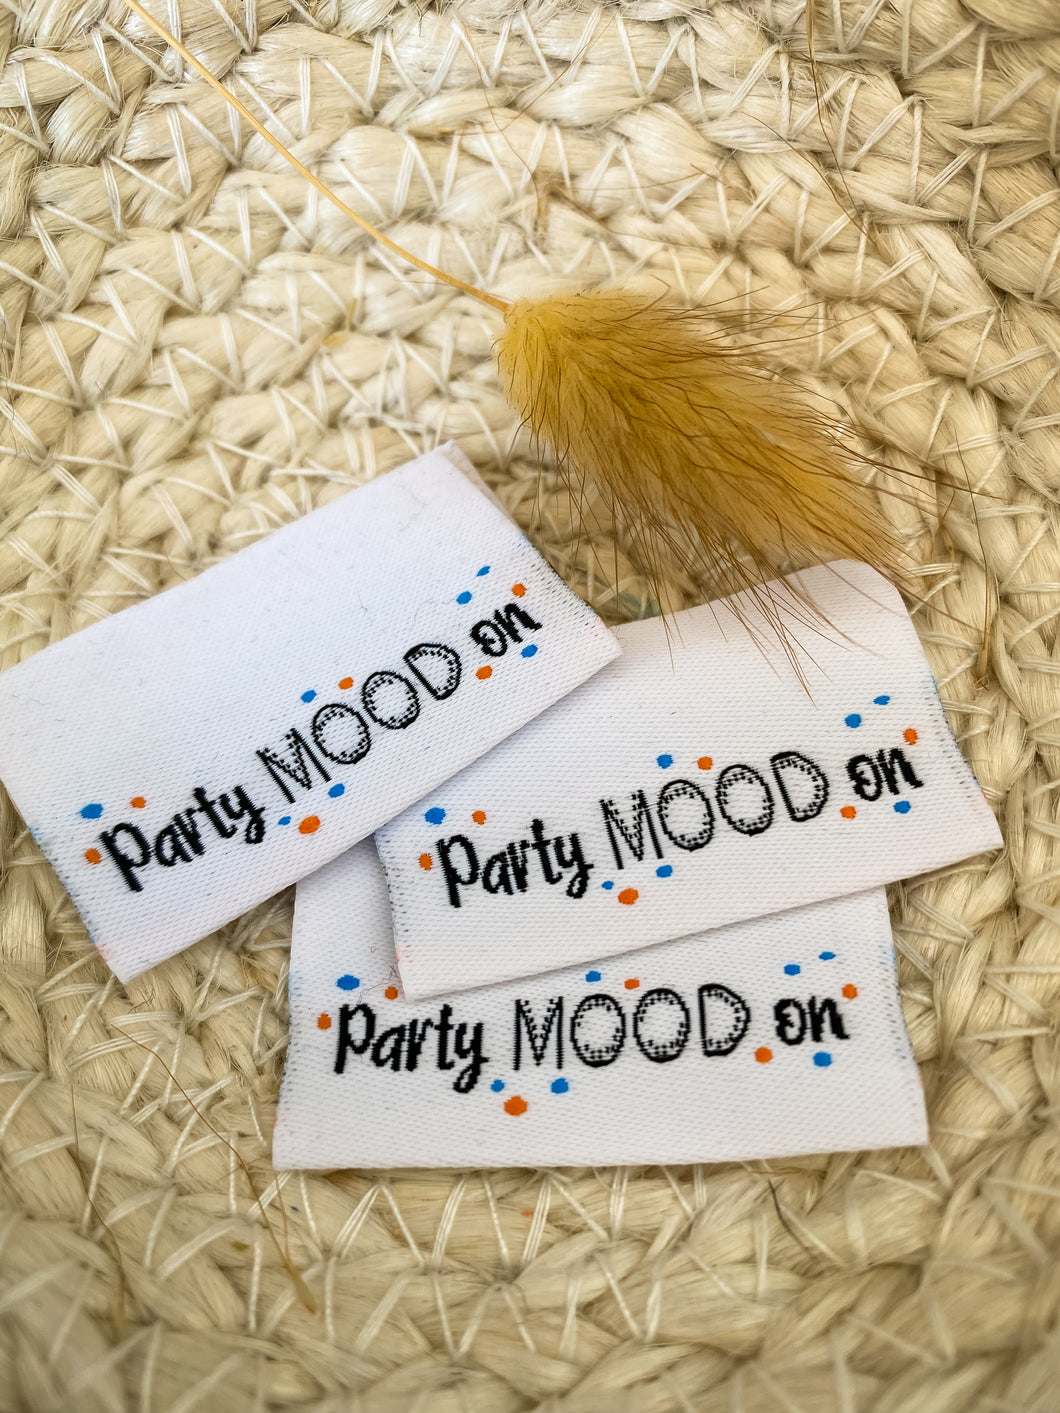 Party mood on web Label